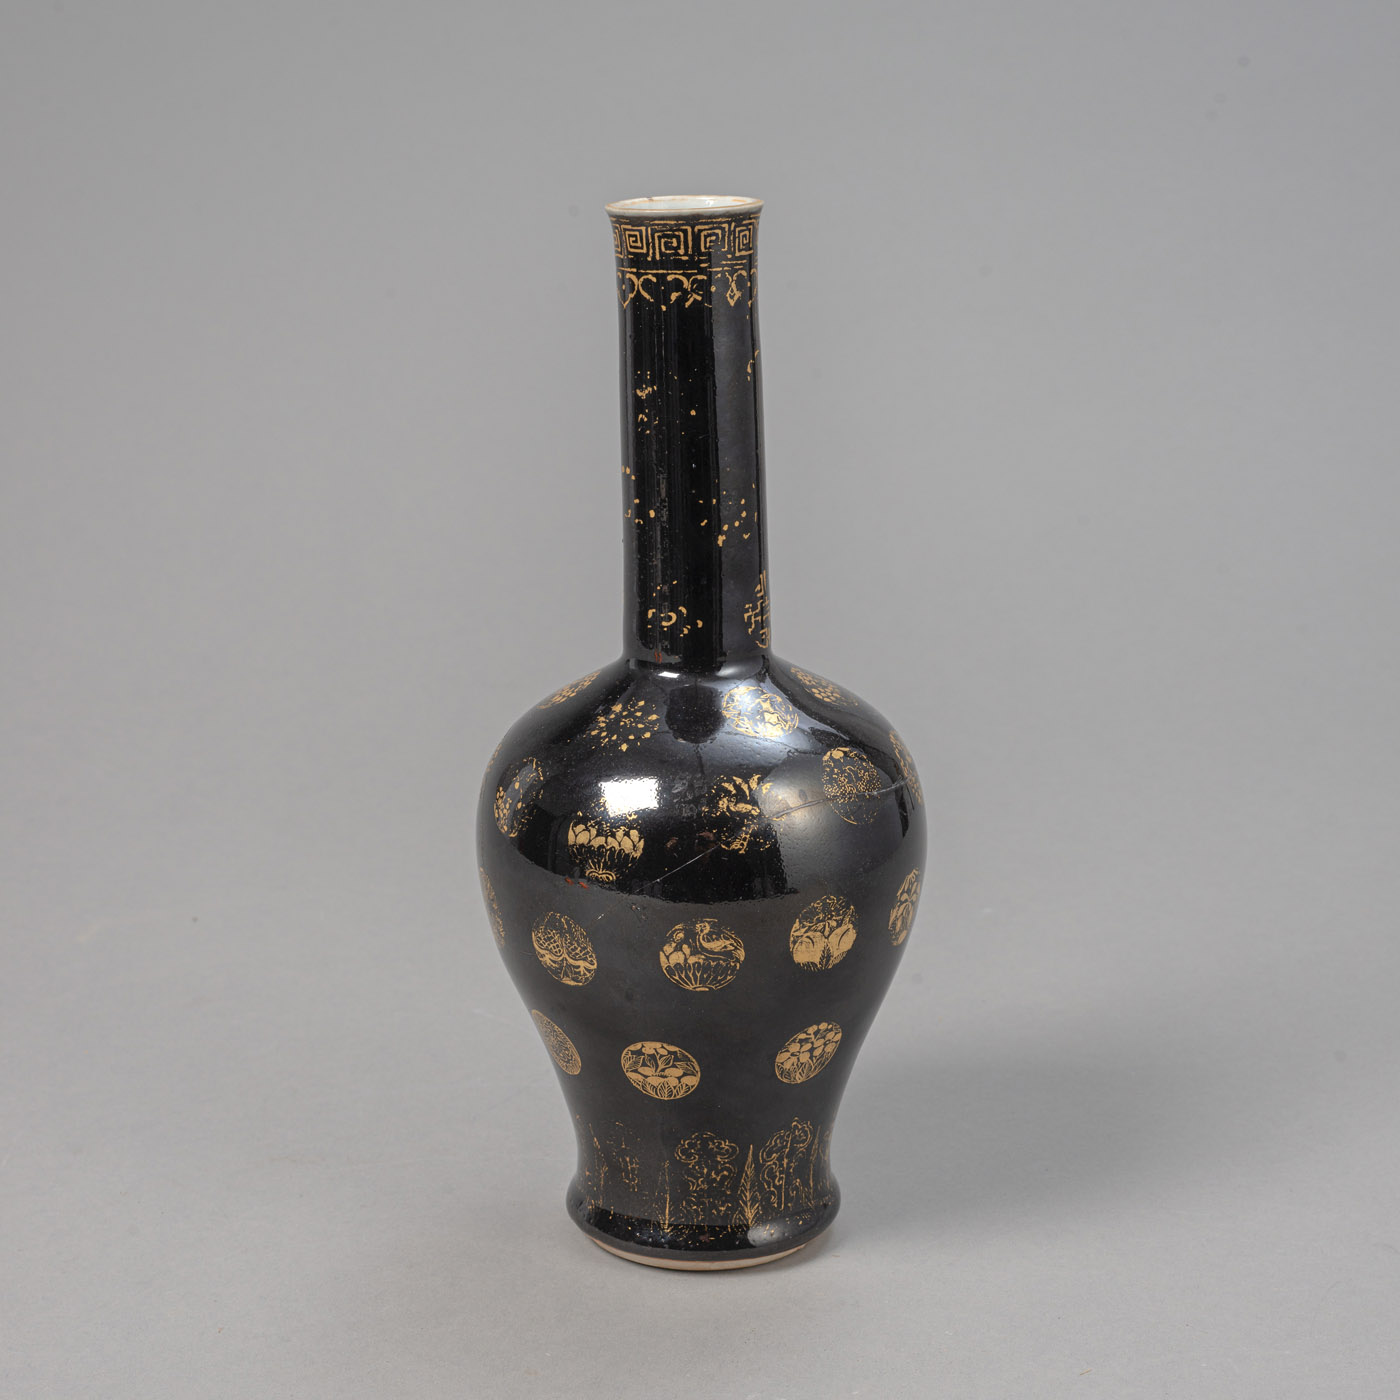 <b>A BLACK GLAZED 'MALLET' VASE (YAOLING ZUN) WITH MEDALLIONS IN GOLD</b>